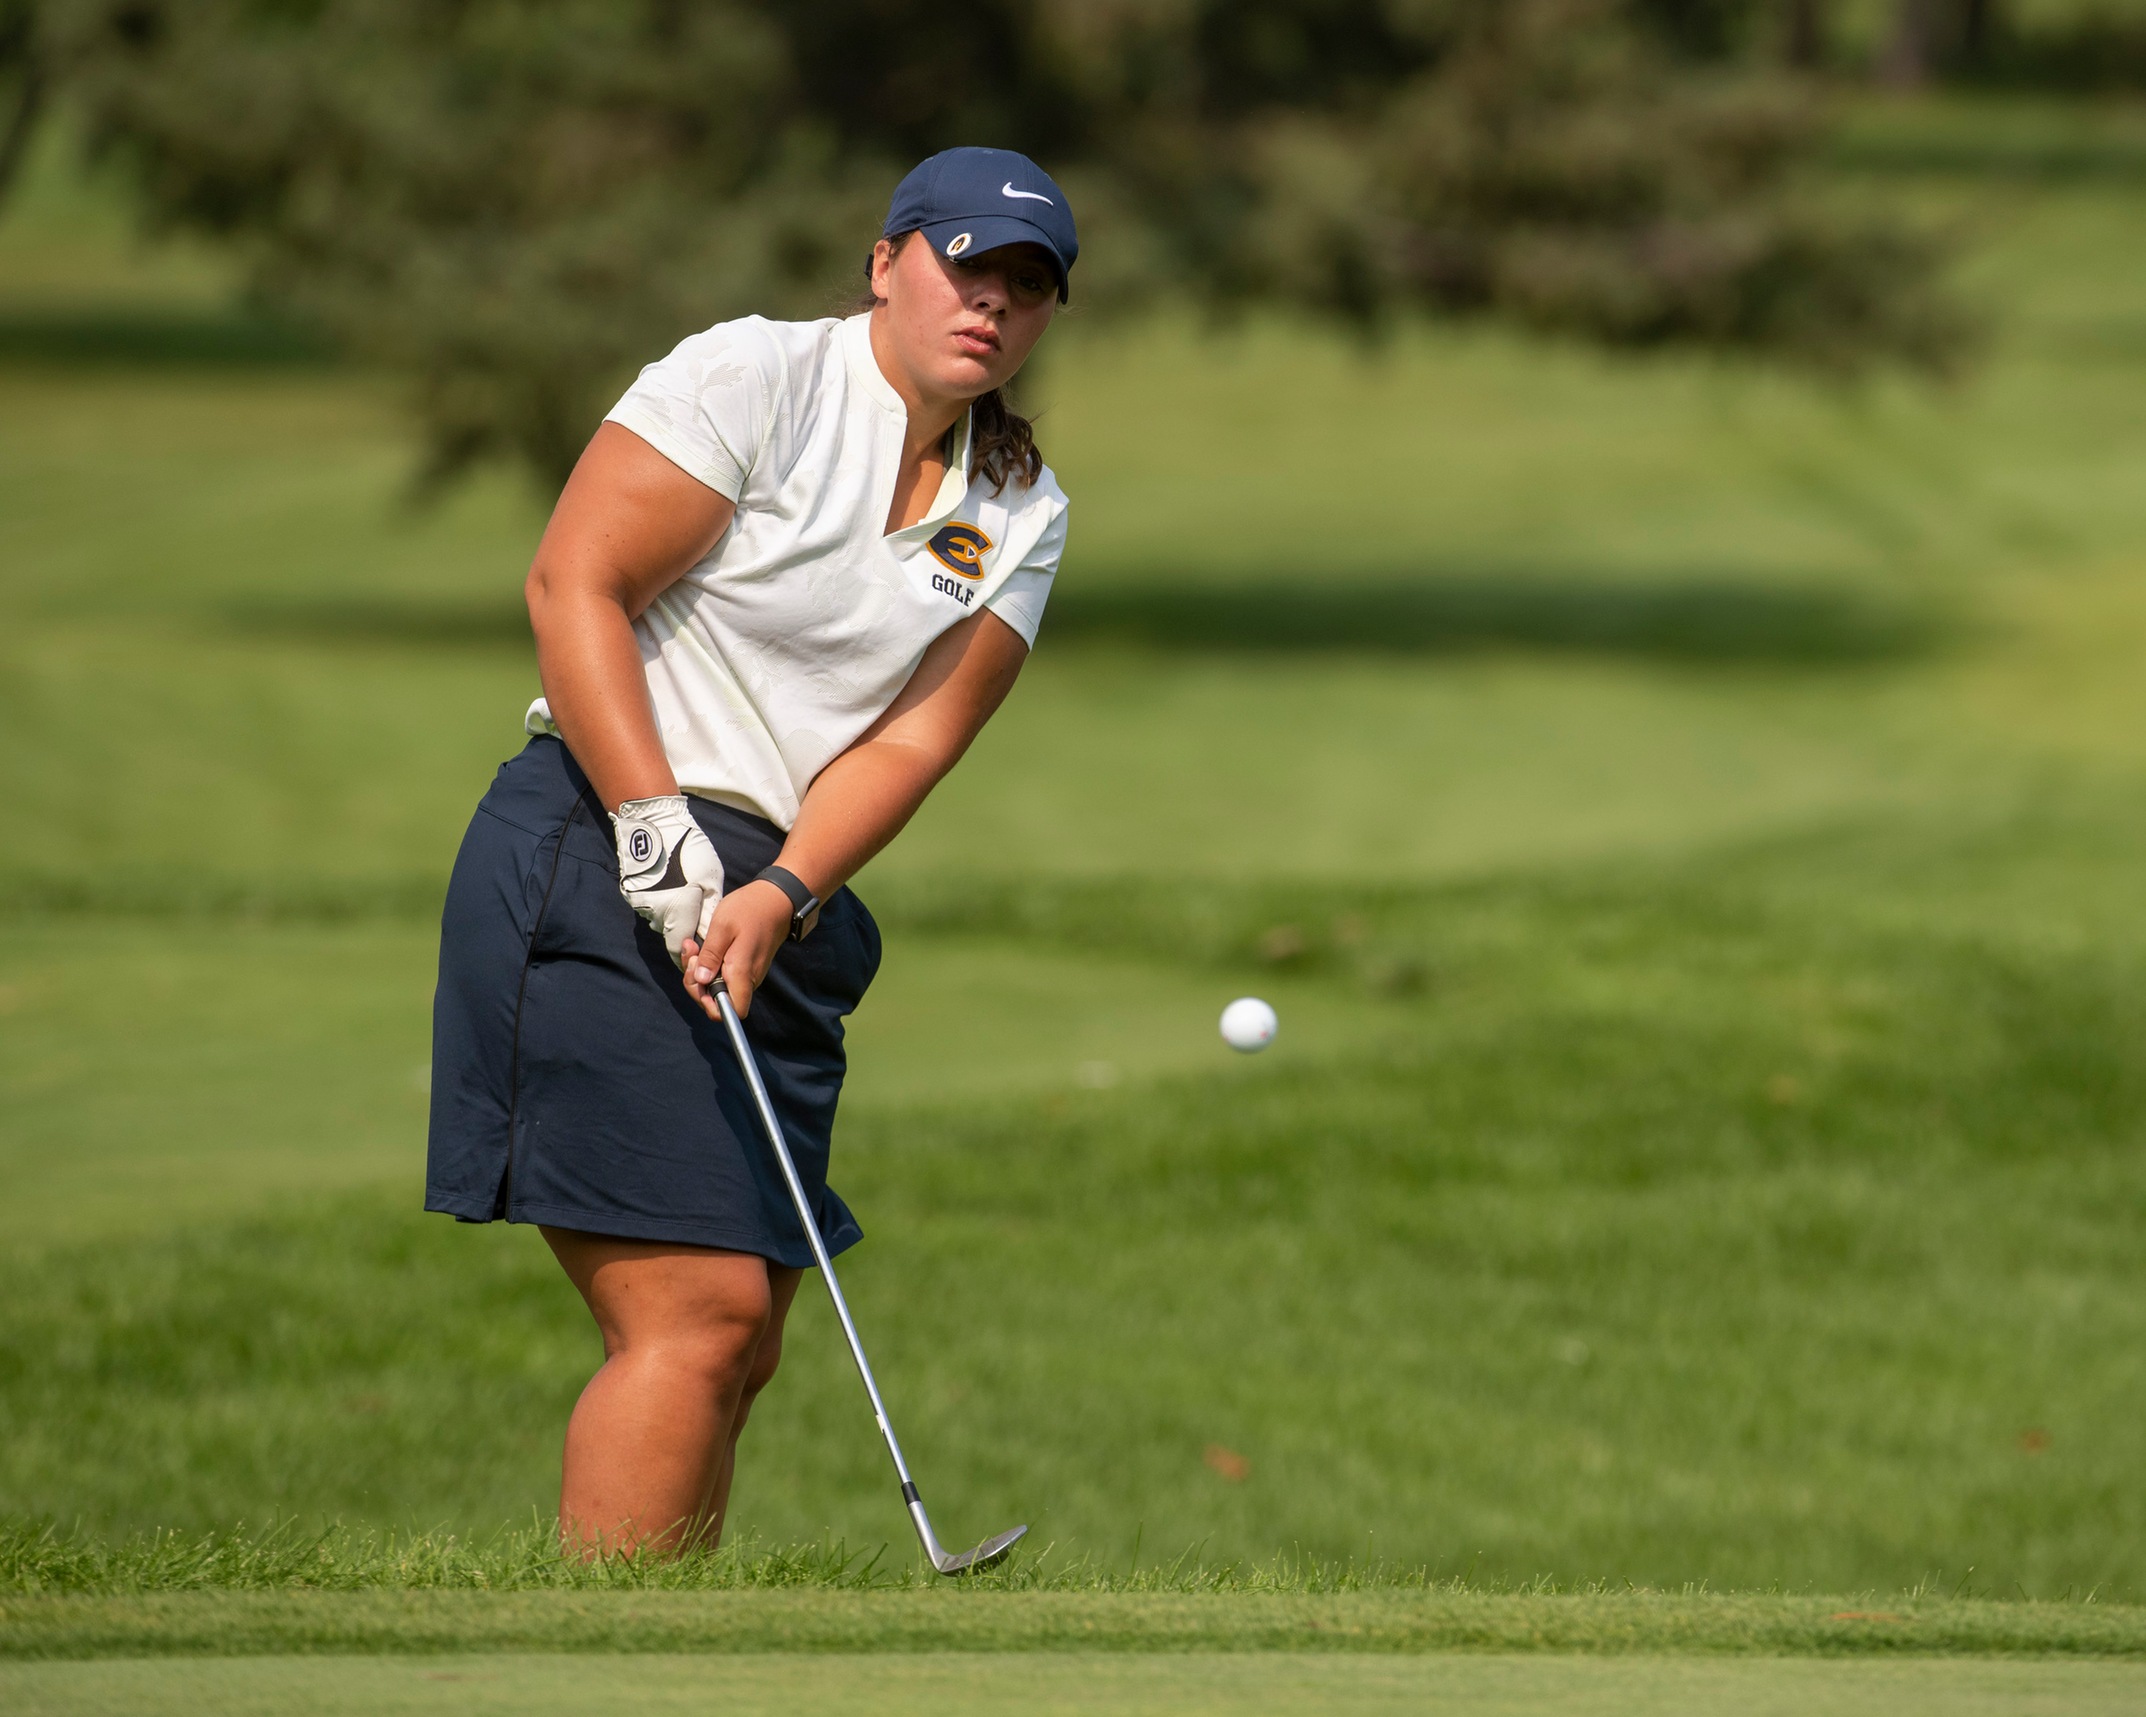 Blugolds Complete First Day at the St. Ben's Invitational